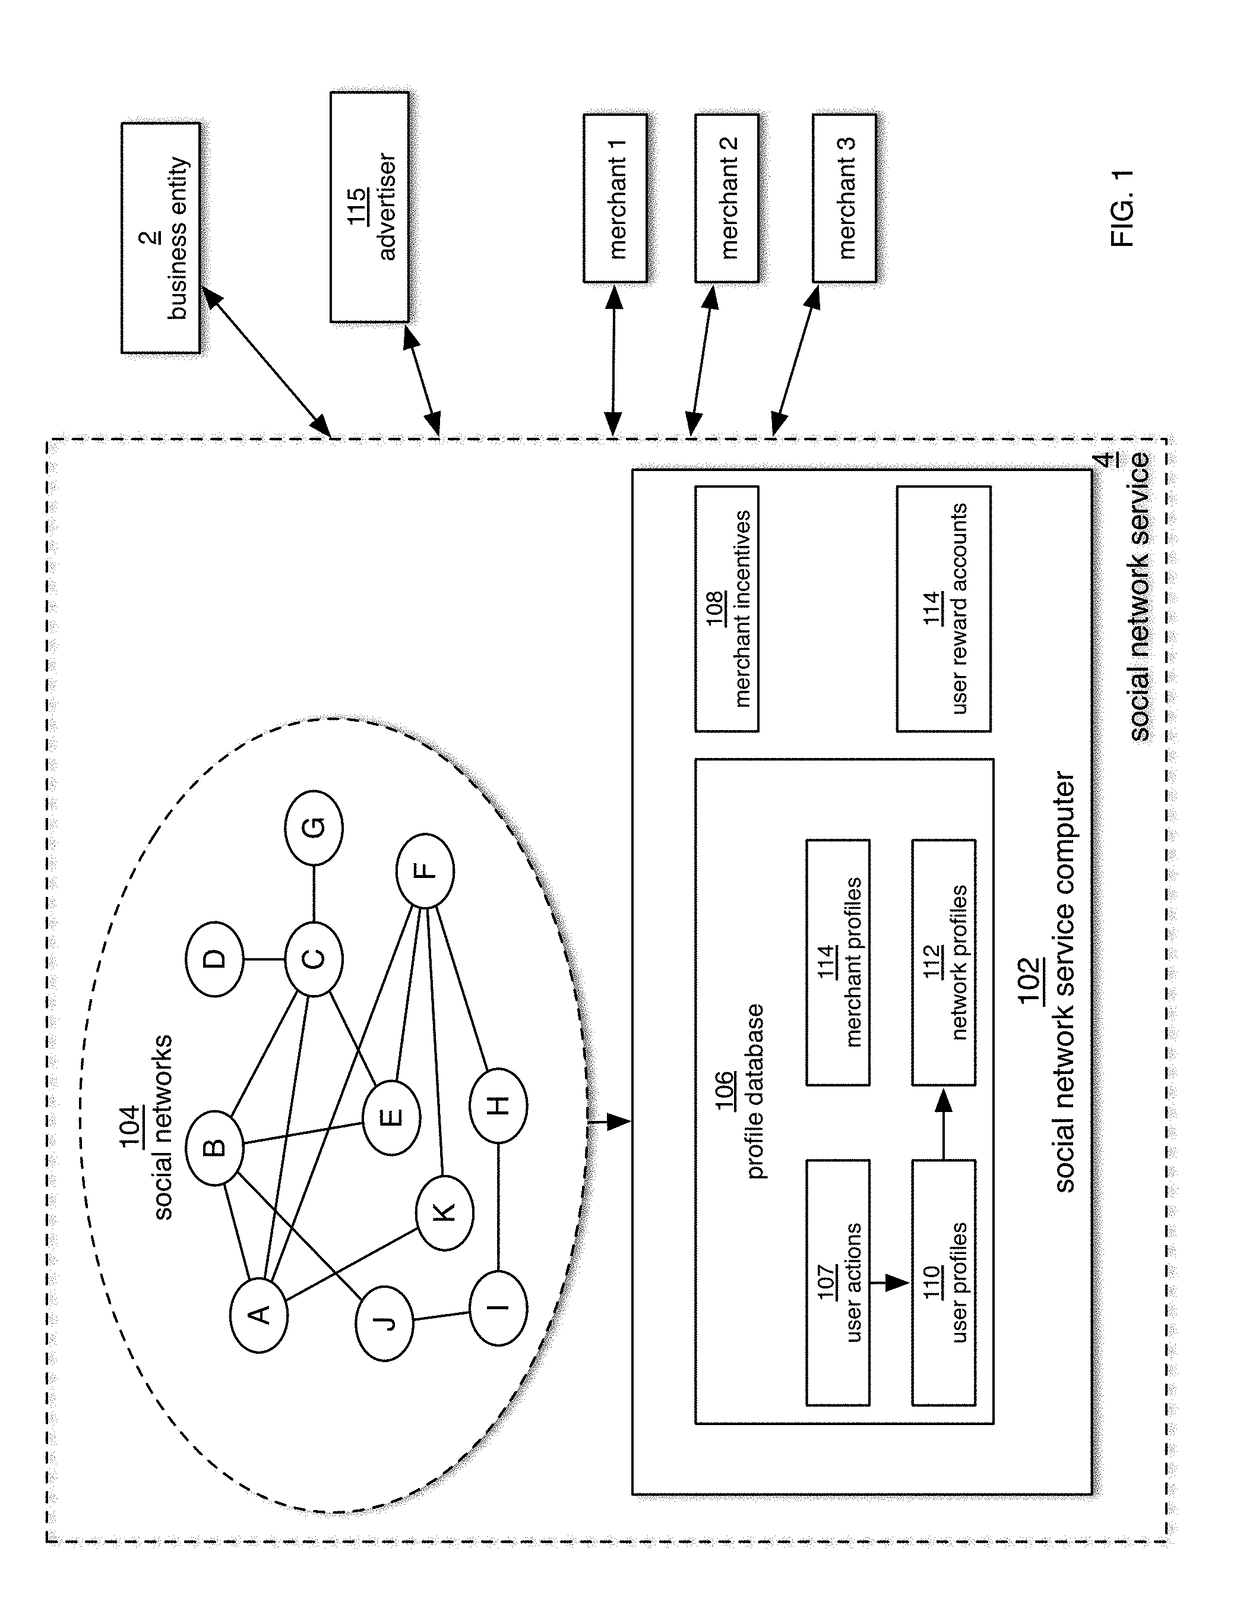 Consumer data and privacy controls in a social networking environment